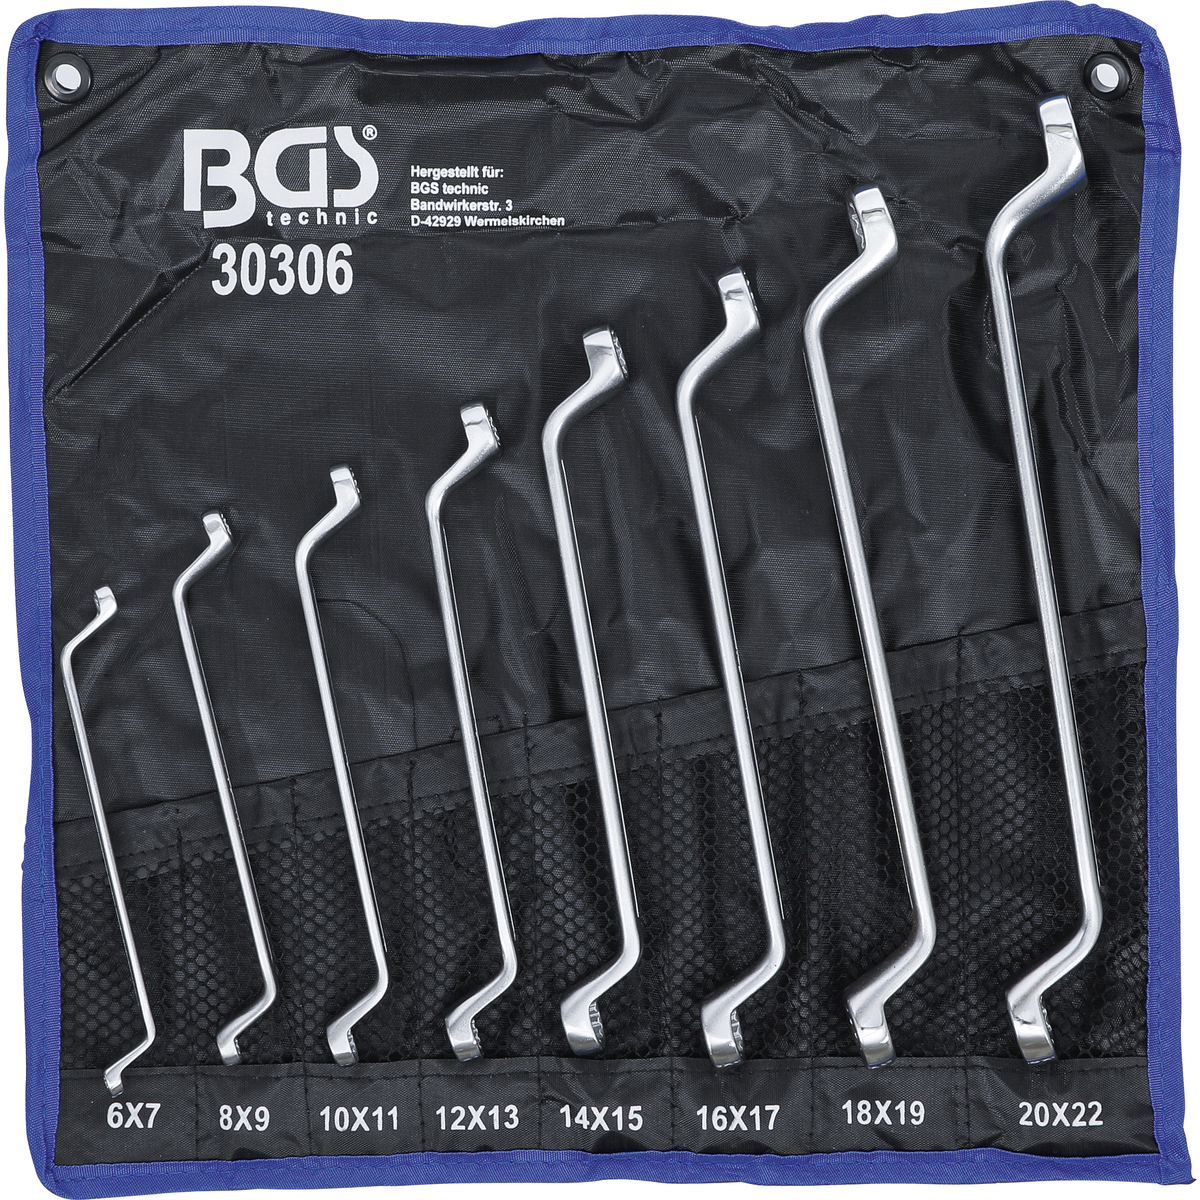 extra long Double Ring Spanner BGS 1186-10x11 10 x 11 mm